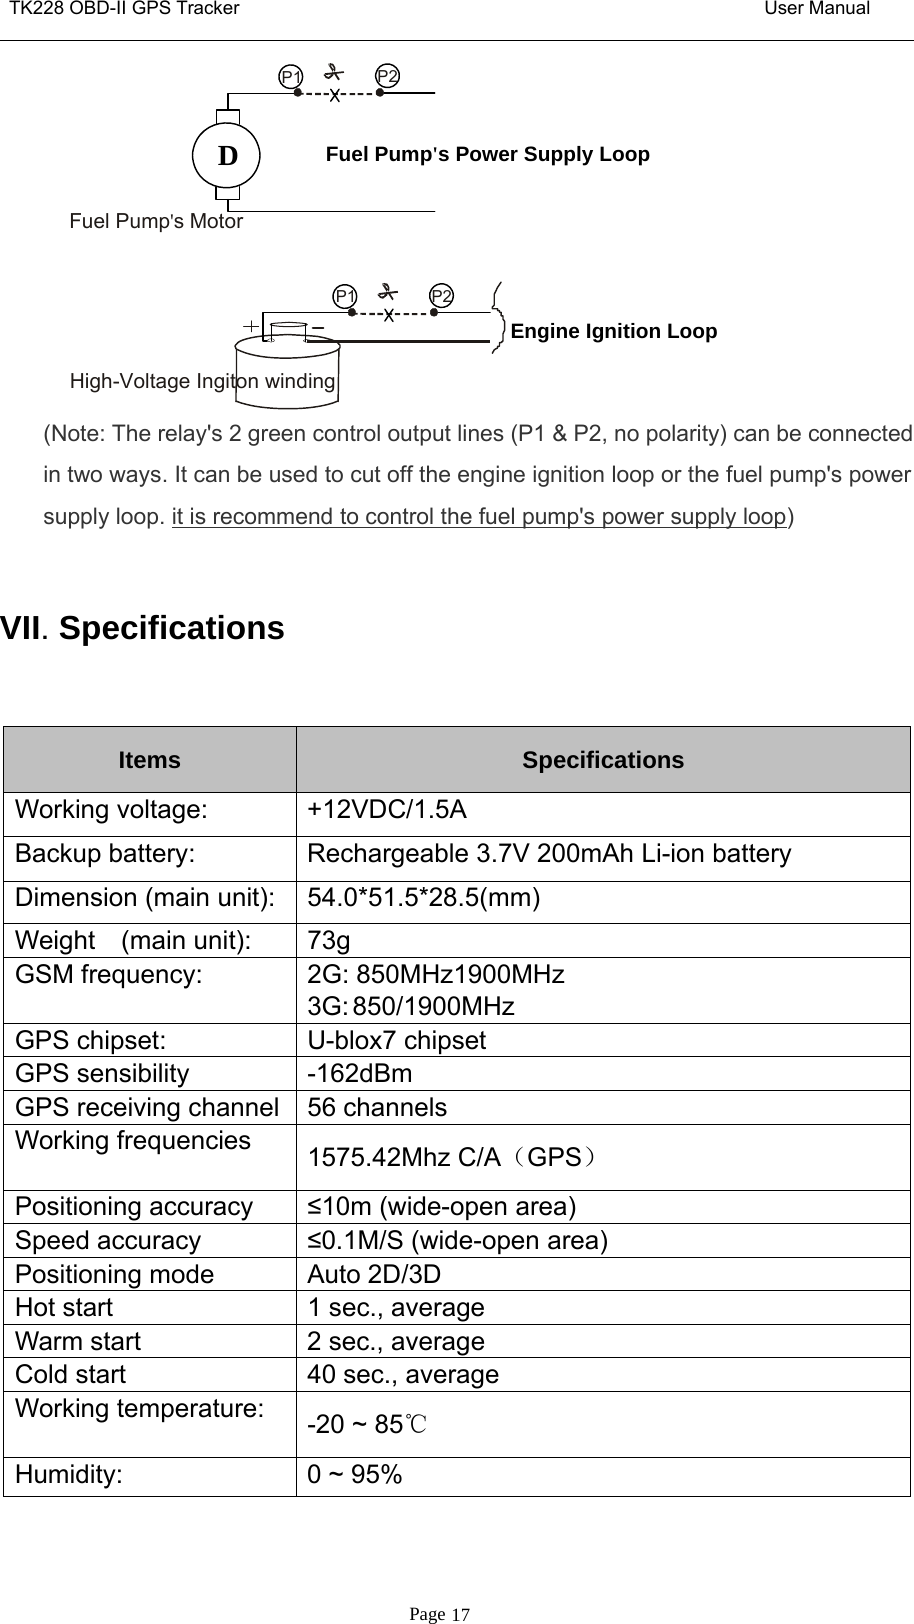 TK228 OBD-II GPS Tracker User ManualPage 17(Note: The relay&apos;s 2 green control output lines (P1 &amp; P2, no polarity) can be connectedin two ways. It can be used to cut off the engine ignition loop or the fuel pump&apos;s powersupply loop. it is recommend to control the fuel pump&apos;s power supply loop)VII.SpecificationsItems SpecificationsWorking voltage: +12VDC/1.5ABackup battery: Rechargeable 3.7V 200mAh Li-ion batteryDimension (main unit): 54.0*51.5*28.5(mm)Weight (main unit): 73gGSM frequency: 2G: 850MHz1900MHz3G: 850/1900MHzGPS chipset: U-blox7 chipsetGPS sensibility -162dBmGPS receiving channel 56 channelsWorking frequencies 1575.42Mhz C/A（GPS）Positioning accuracy ≤10m (wide-open area)Speed accuracy ≤0.1M/S (wide-open area)Positioning mode Auto 2D/3DHot start 1 sec., averageWarm start 2 sec., averageCold start 40 sec., averageWorking temperature: -20 ~ 85℃Humidity: 0 ~ 95%High-Voltage Ingiton windingP1 P2Engine Ignition LoopFuel Pump&apos;s Power Supply LoopDP1 P2Fuel Pump&apos;s Motor